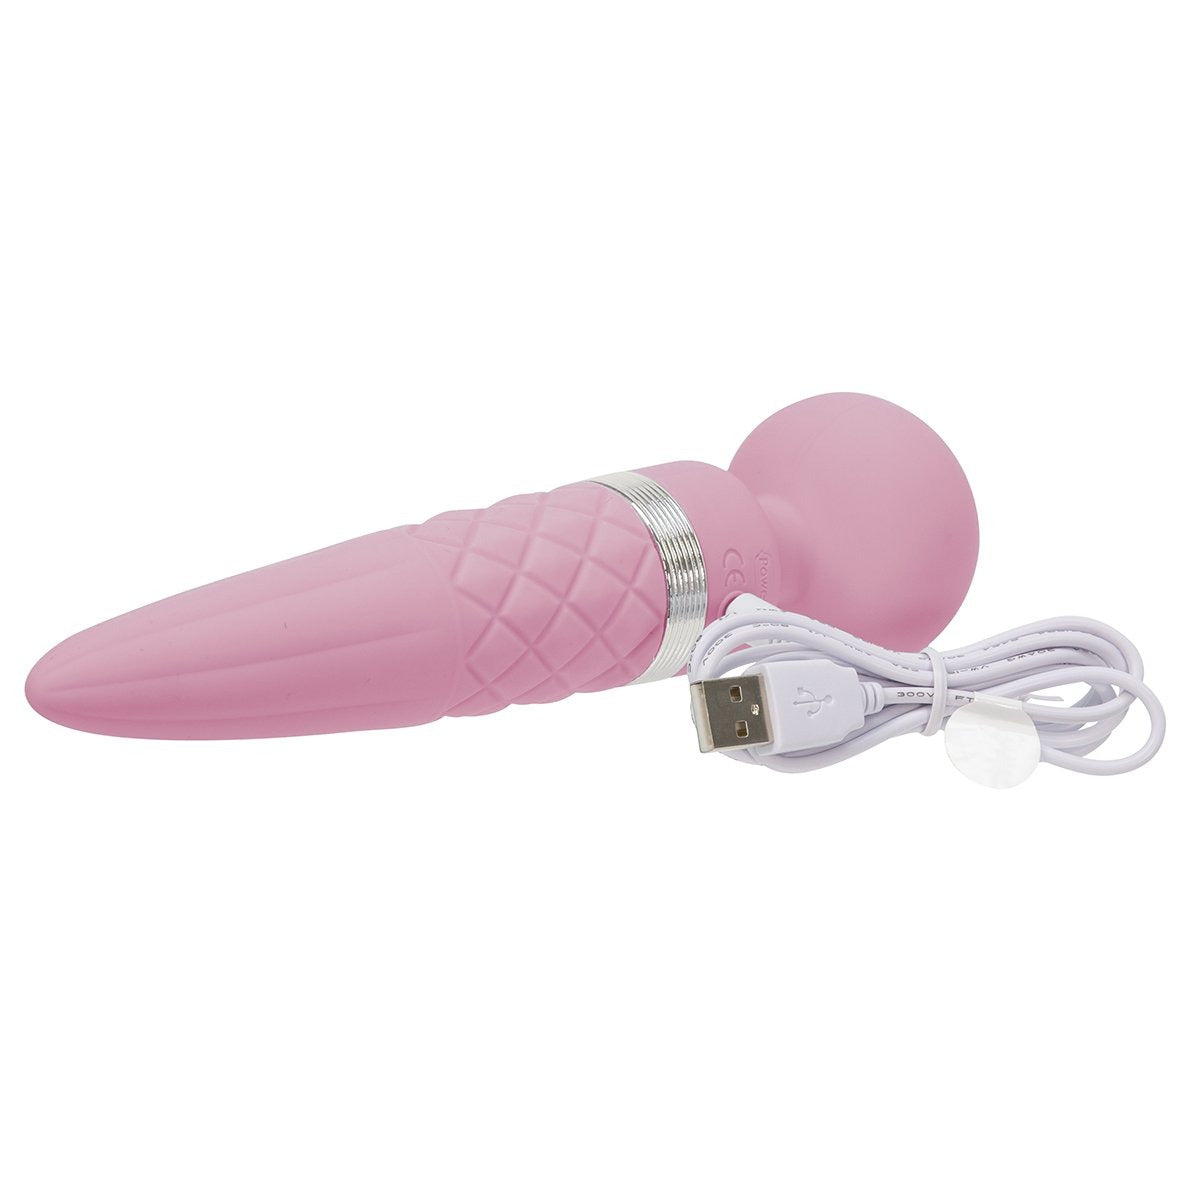 Pillow Talk Sultry Wand - Buy At Luxury Toy X - Free 3-Day Shipping